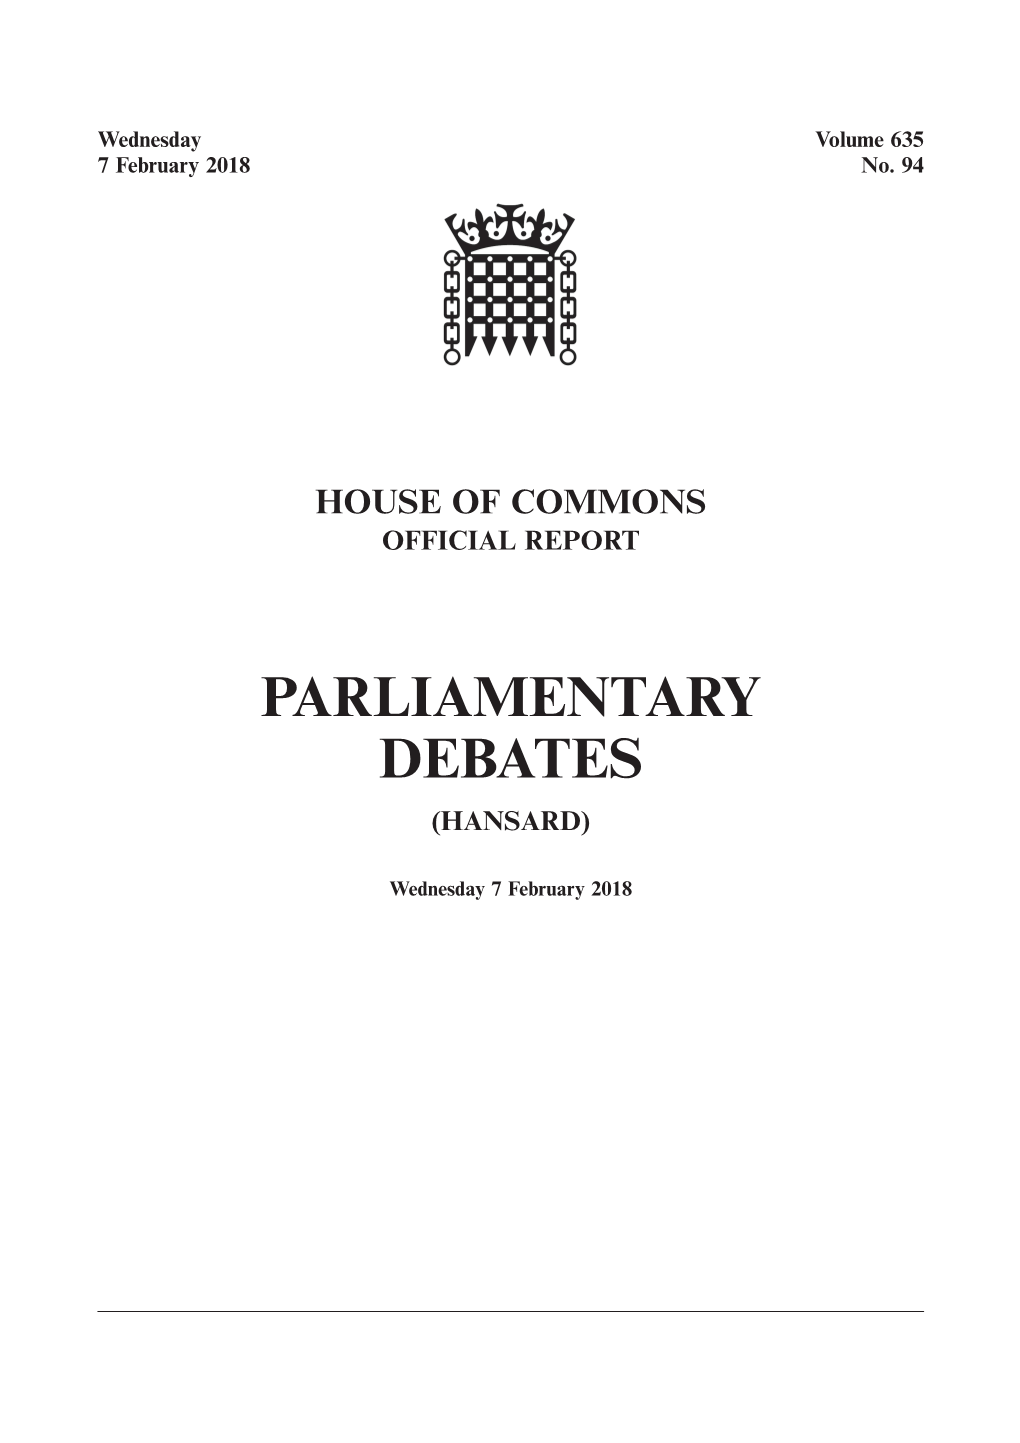 Whole Day Download the Hansard Record of the Entire Day in PDF Format. PDF File, 1.21